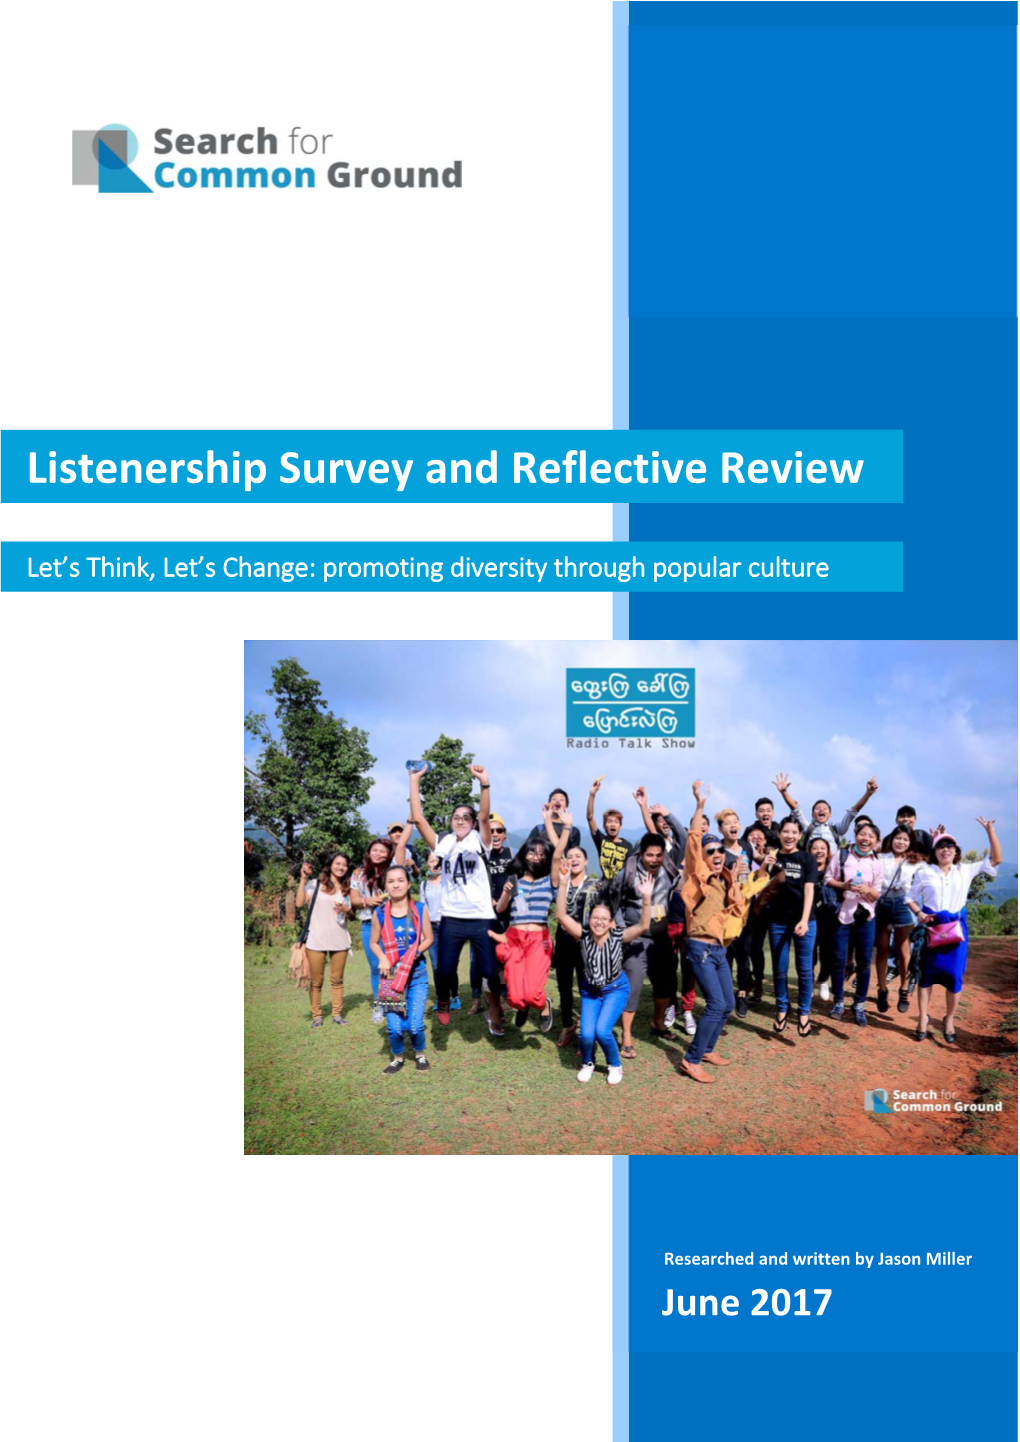 Listenership Survey and Reflective Review: “Let's Think, Let's Change”